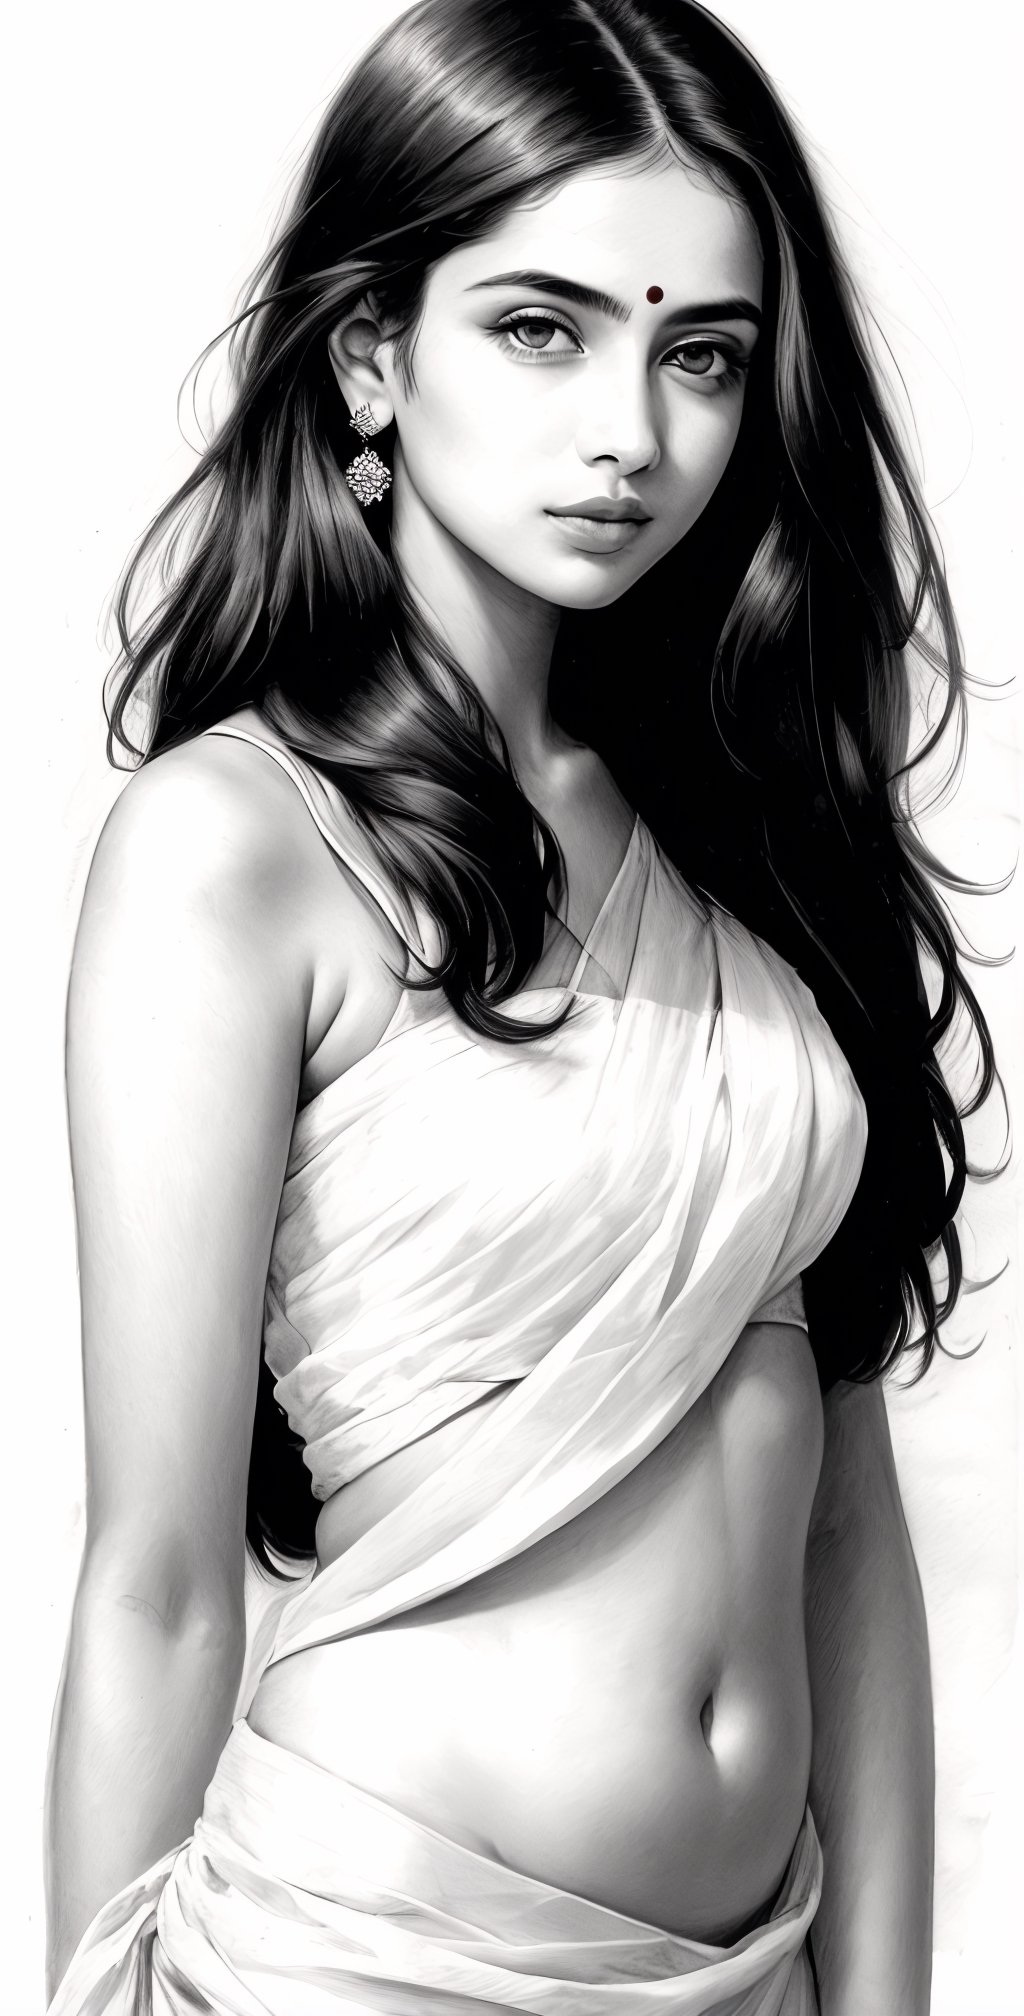 Pencil sketch, pencil sketch portrait of beautiful indian girl with long hair, blue eyes, embarrassed, nice figure, slim belly, Indian revealed white saree, Art, black and white sketch, on white art paper, realistic sketch, ultra real sketch, pencil stroke sketch, pencil stroke shadow, perfect real light on paper, xyzsanart01,iinksketch,monochrome, full_body